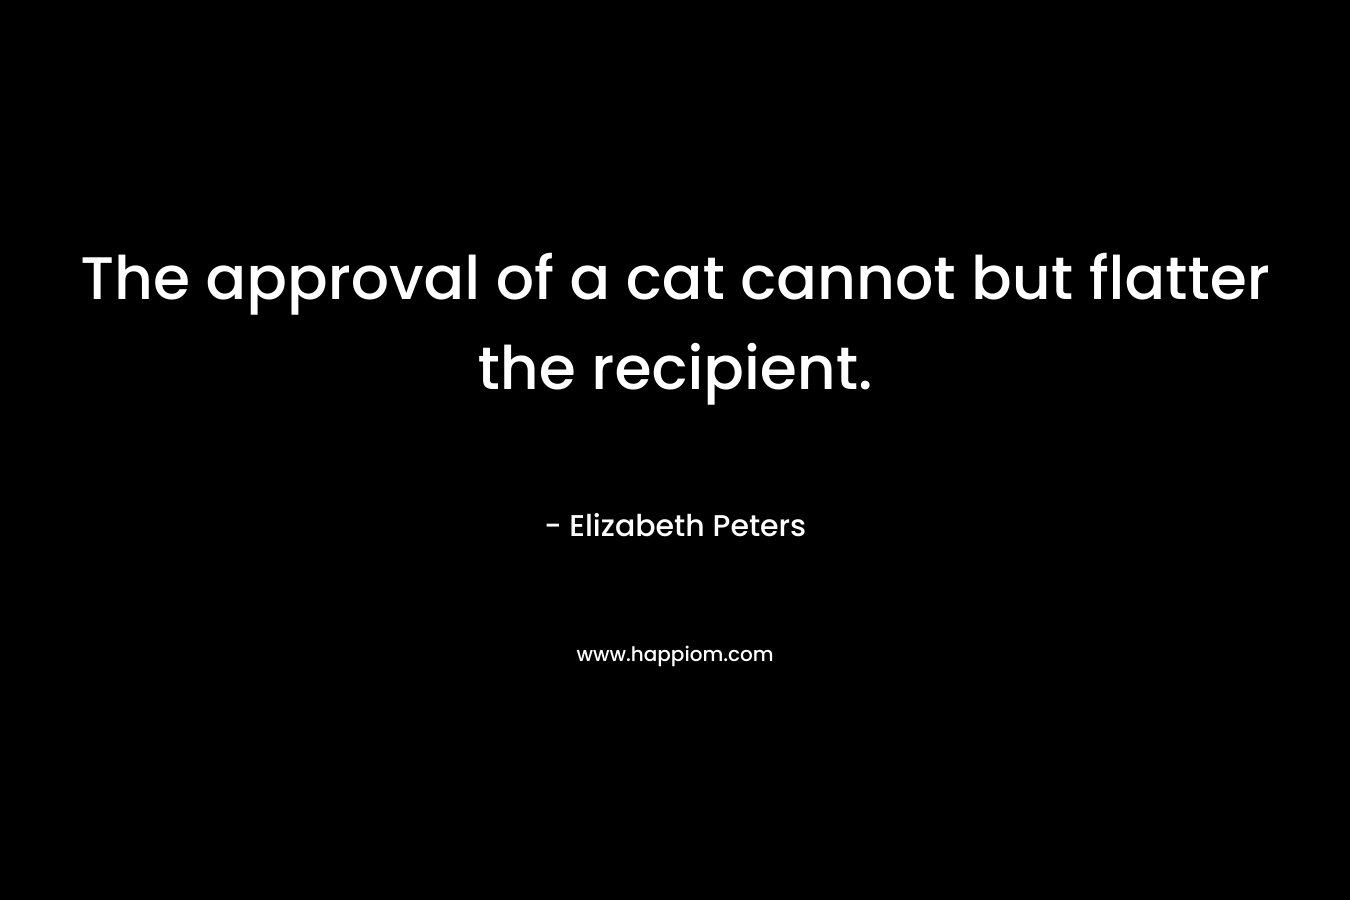 The approval of a cat cannot but flatter the recipient. – Elizabeth Peters